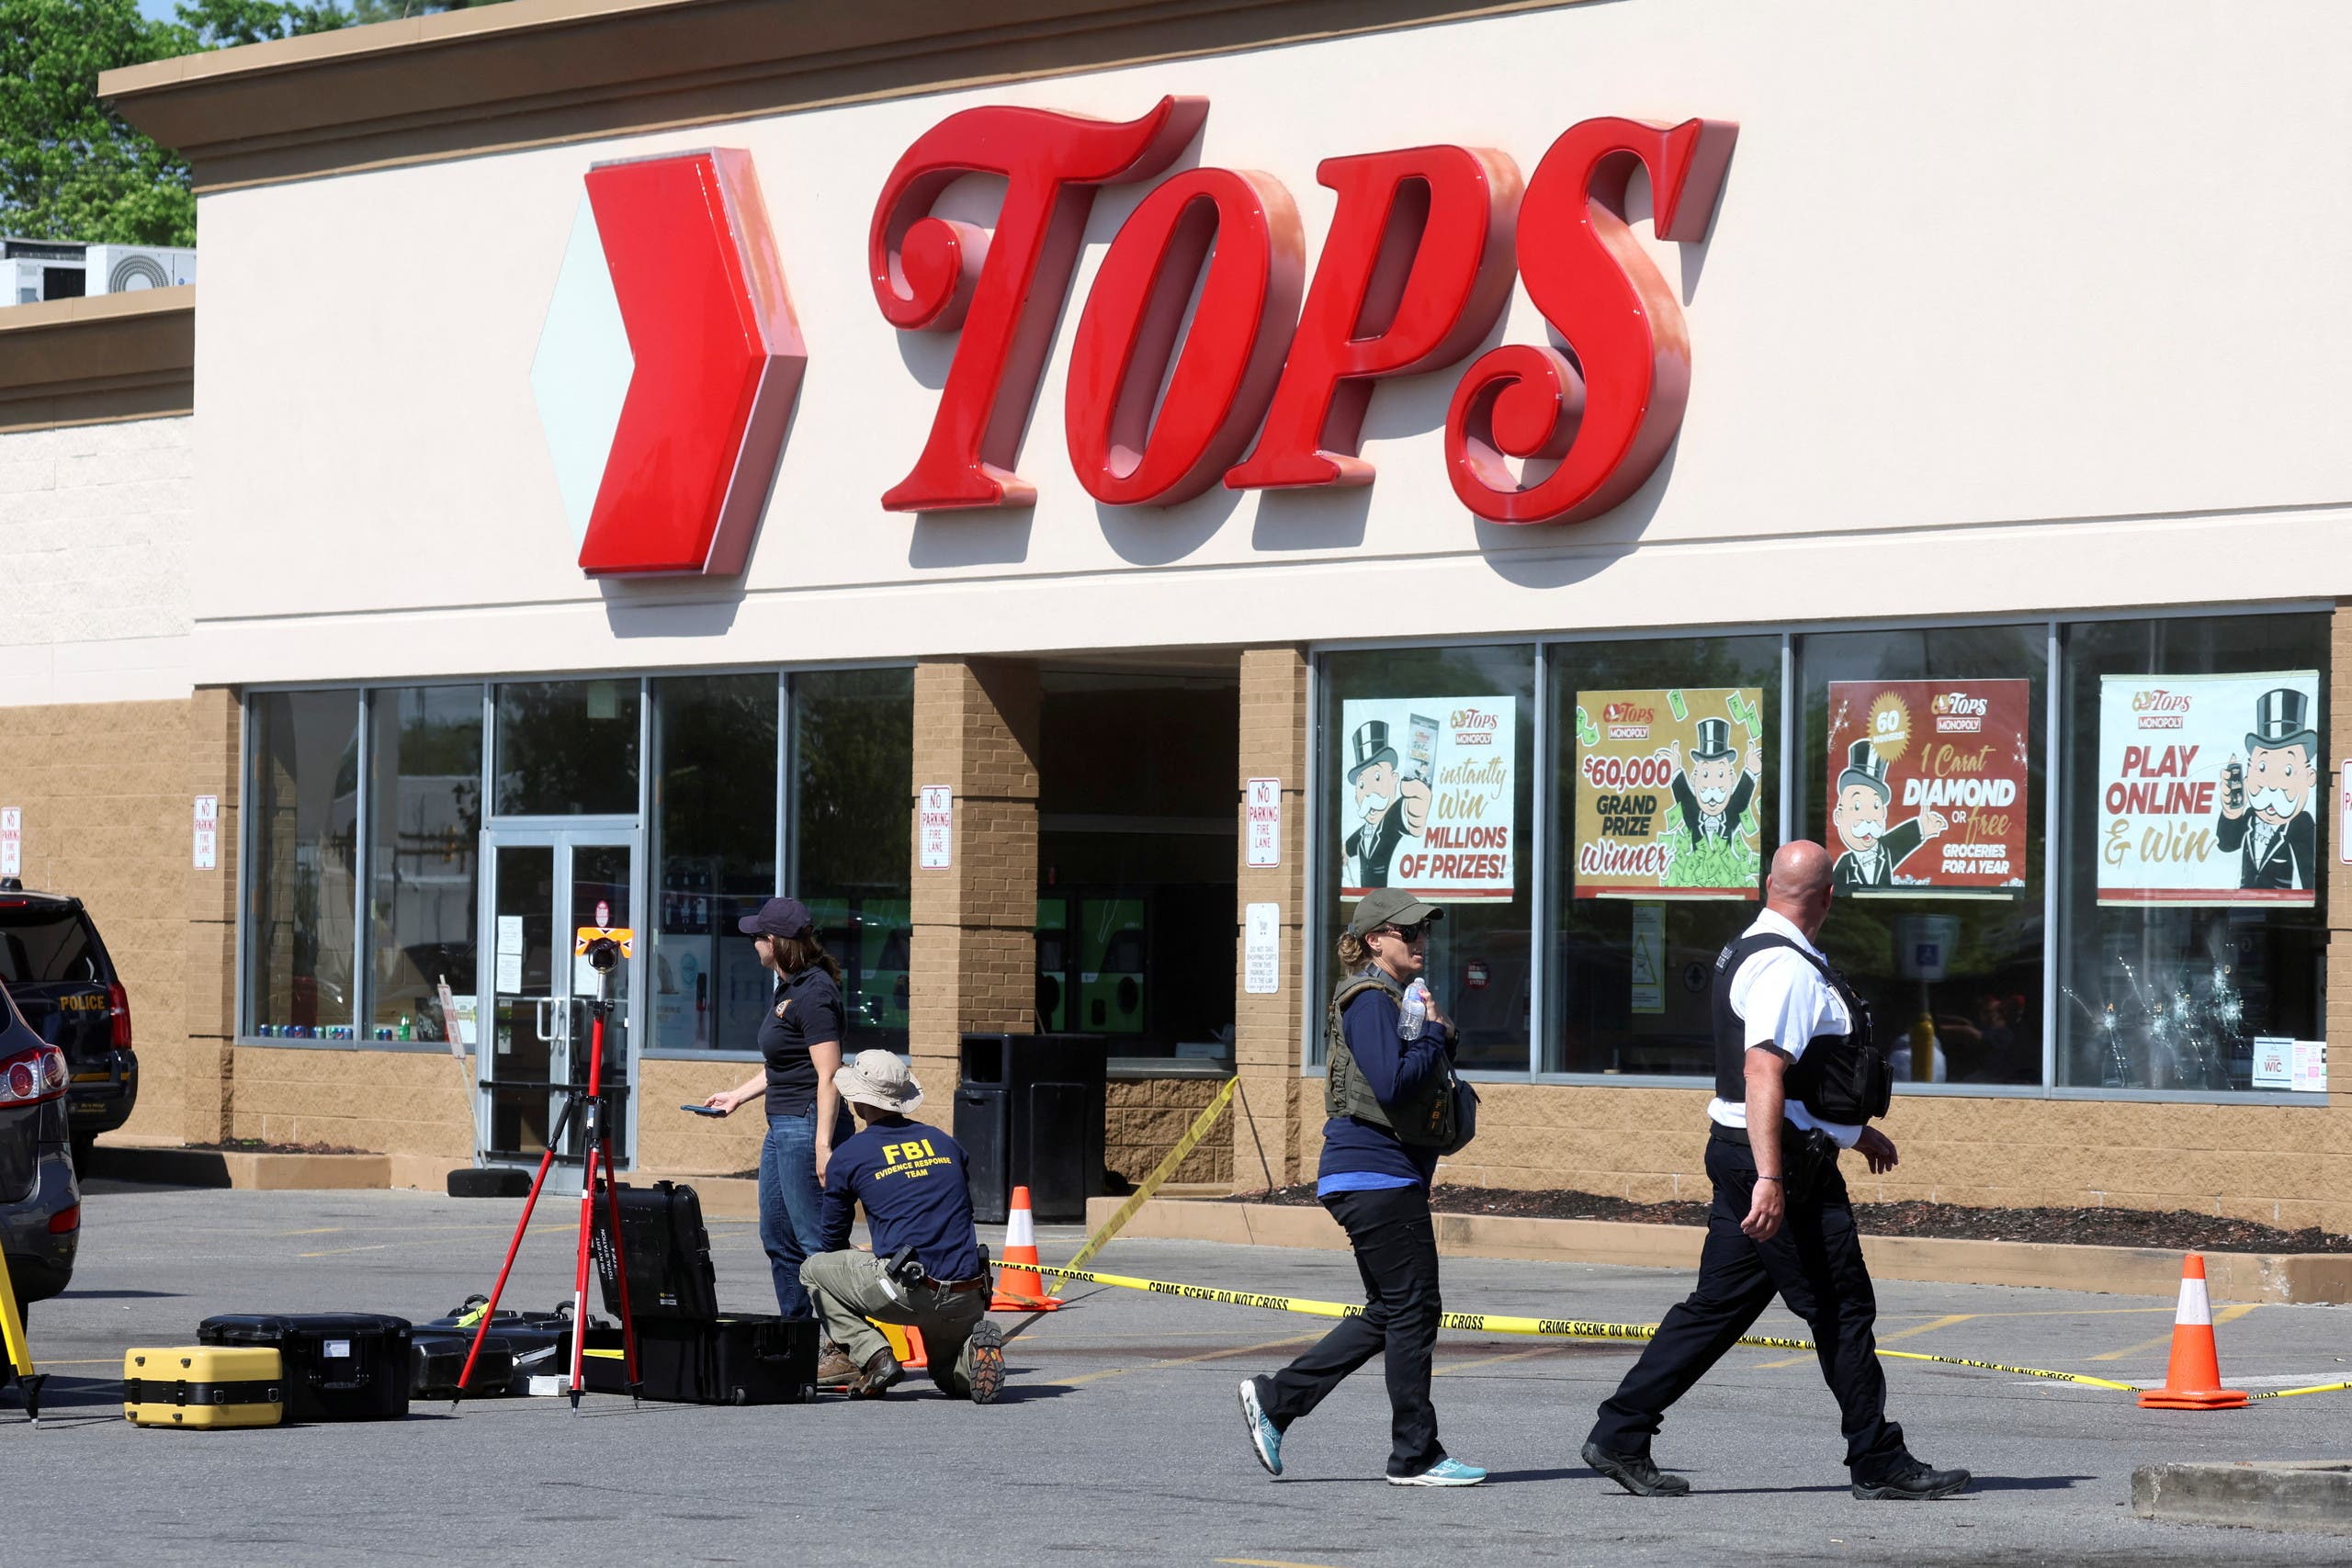 Members of the FBI and Buffalo Police Department collect evidence at the scene of a shooting at a TOPS supermarket in Buffalo, New York, US May 15, 2022. (Reuters)